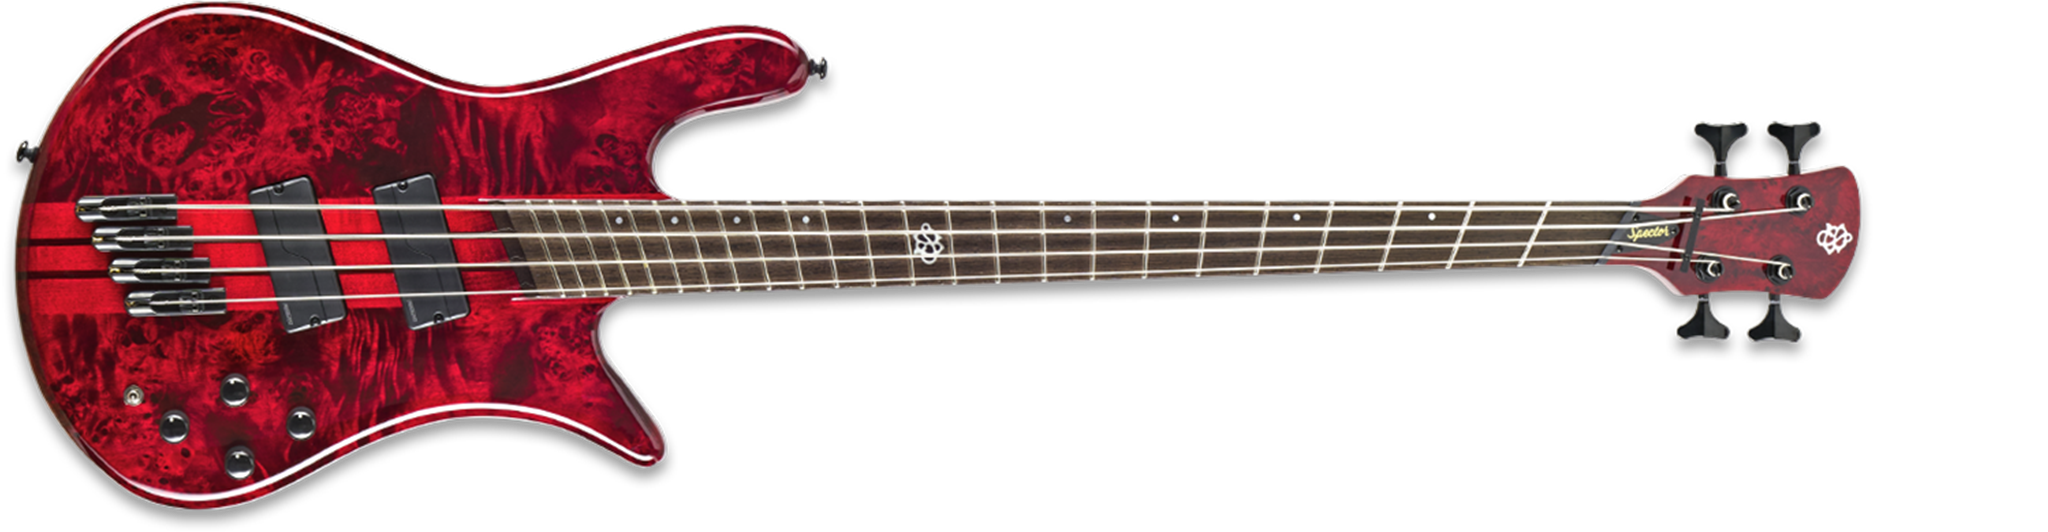 Spector NS Dimension 4 - Multi Scale -Inferno Red 4-String Bass Guitar 2022